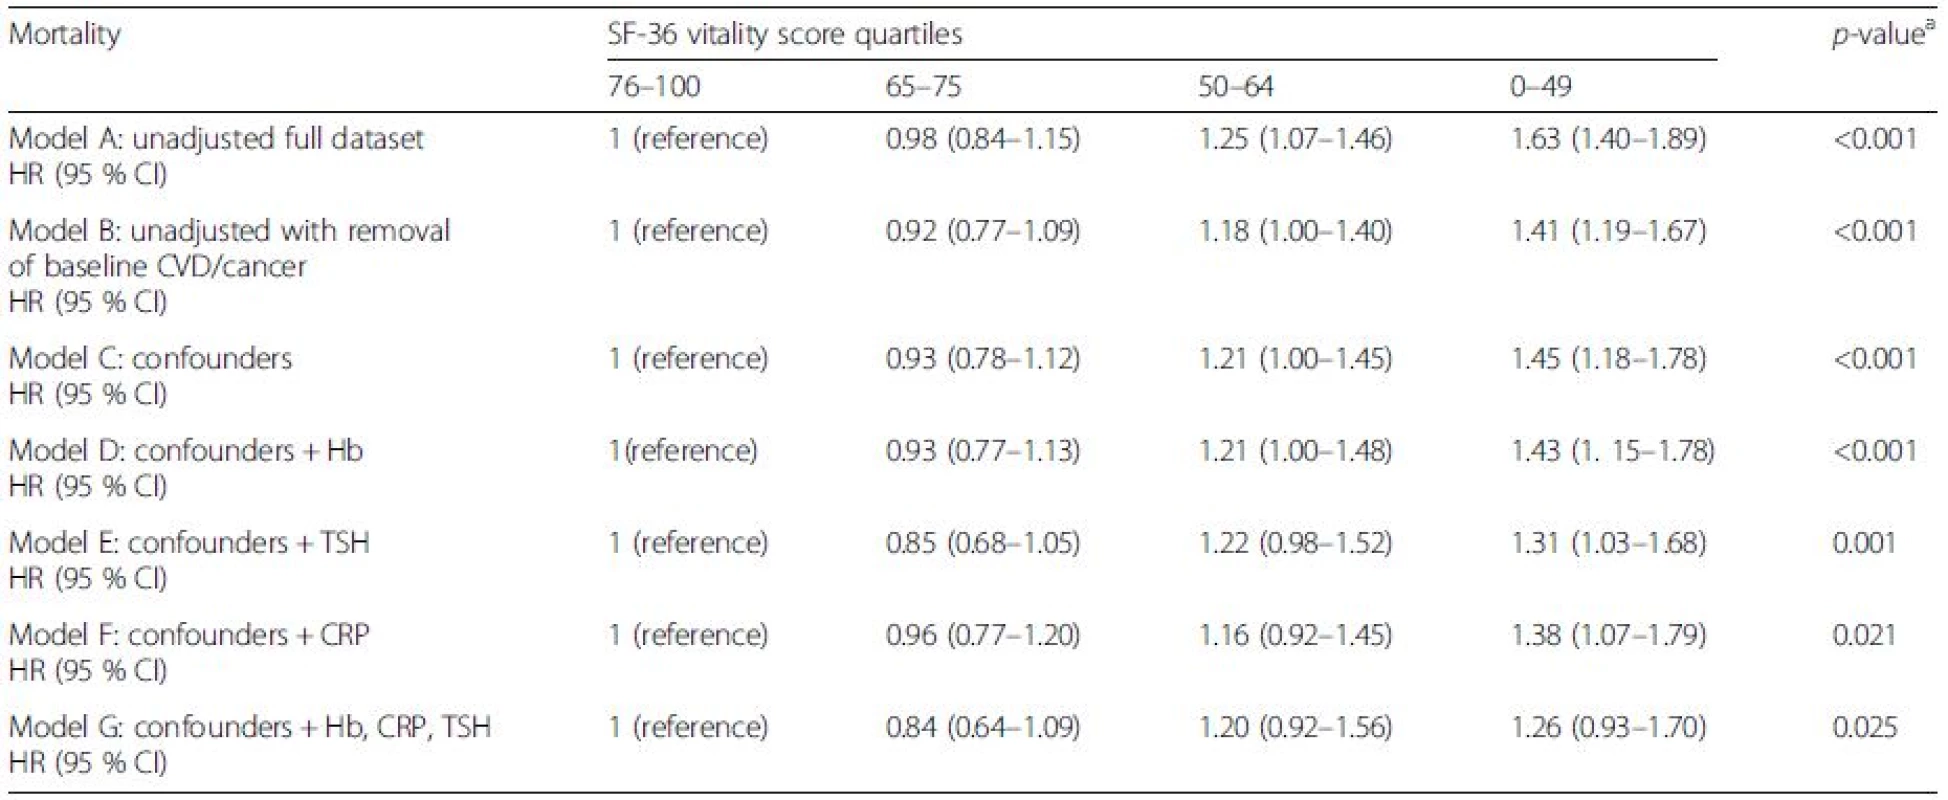 The risks of cardiovascular disease related mortality by SF-36 vitality score in the EPIC-Norfolk study